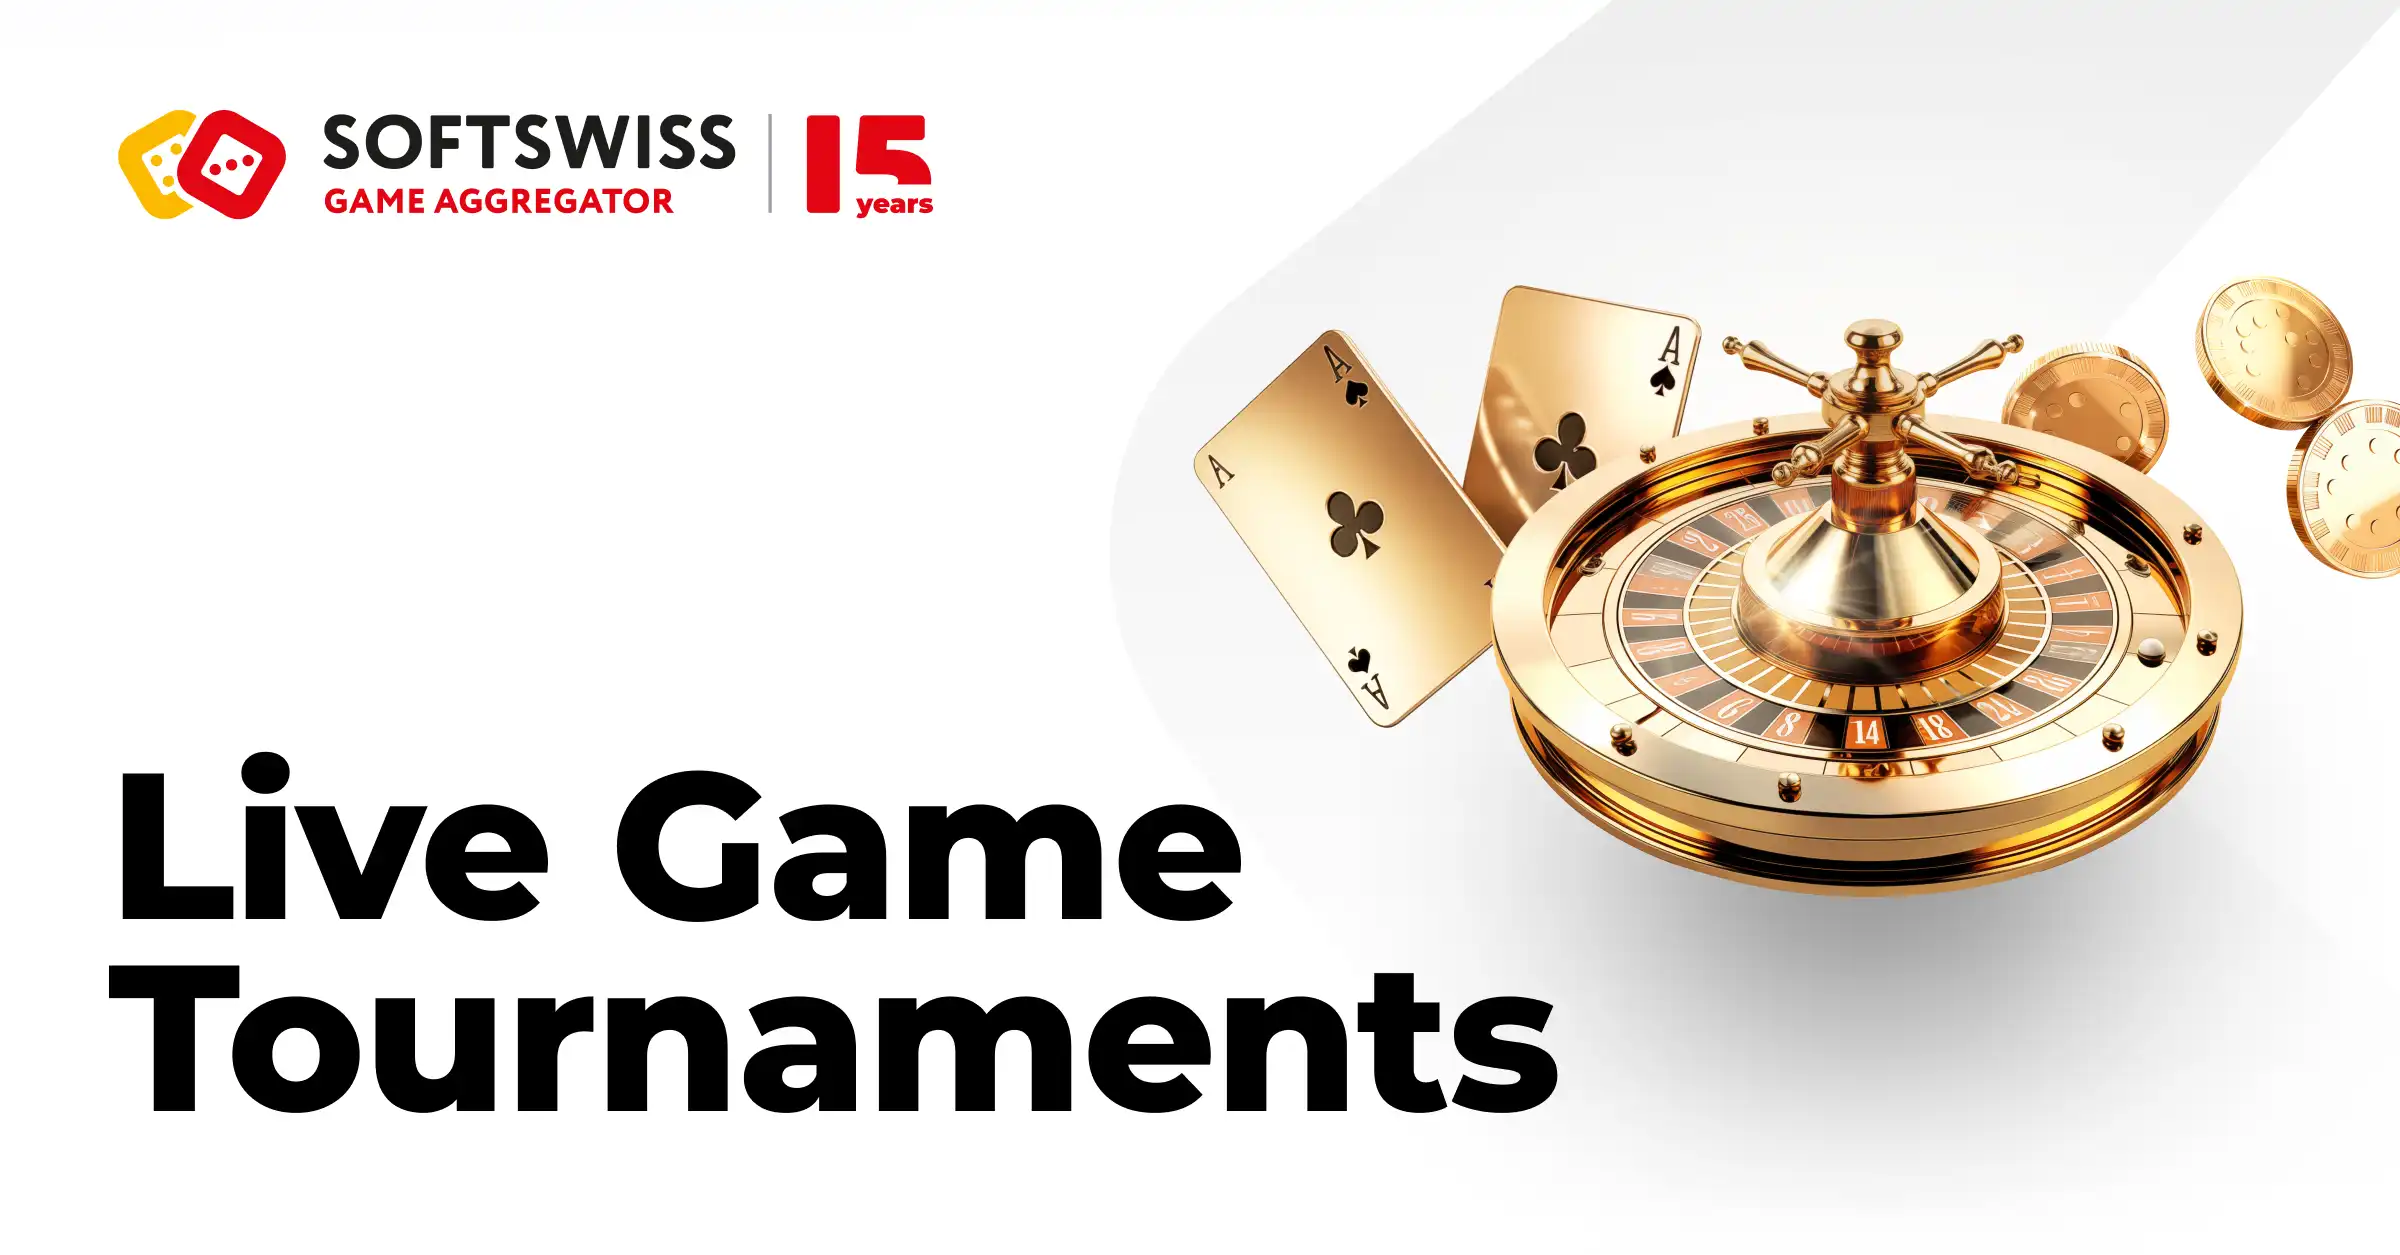 SOFTSWISS Game Aggregator Launches Live Game Tournaments